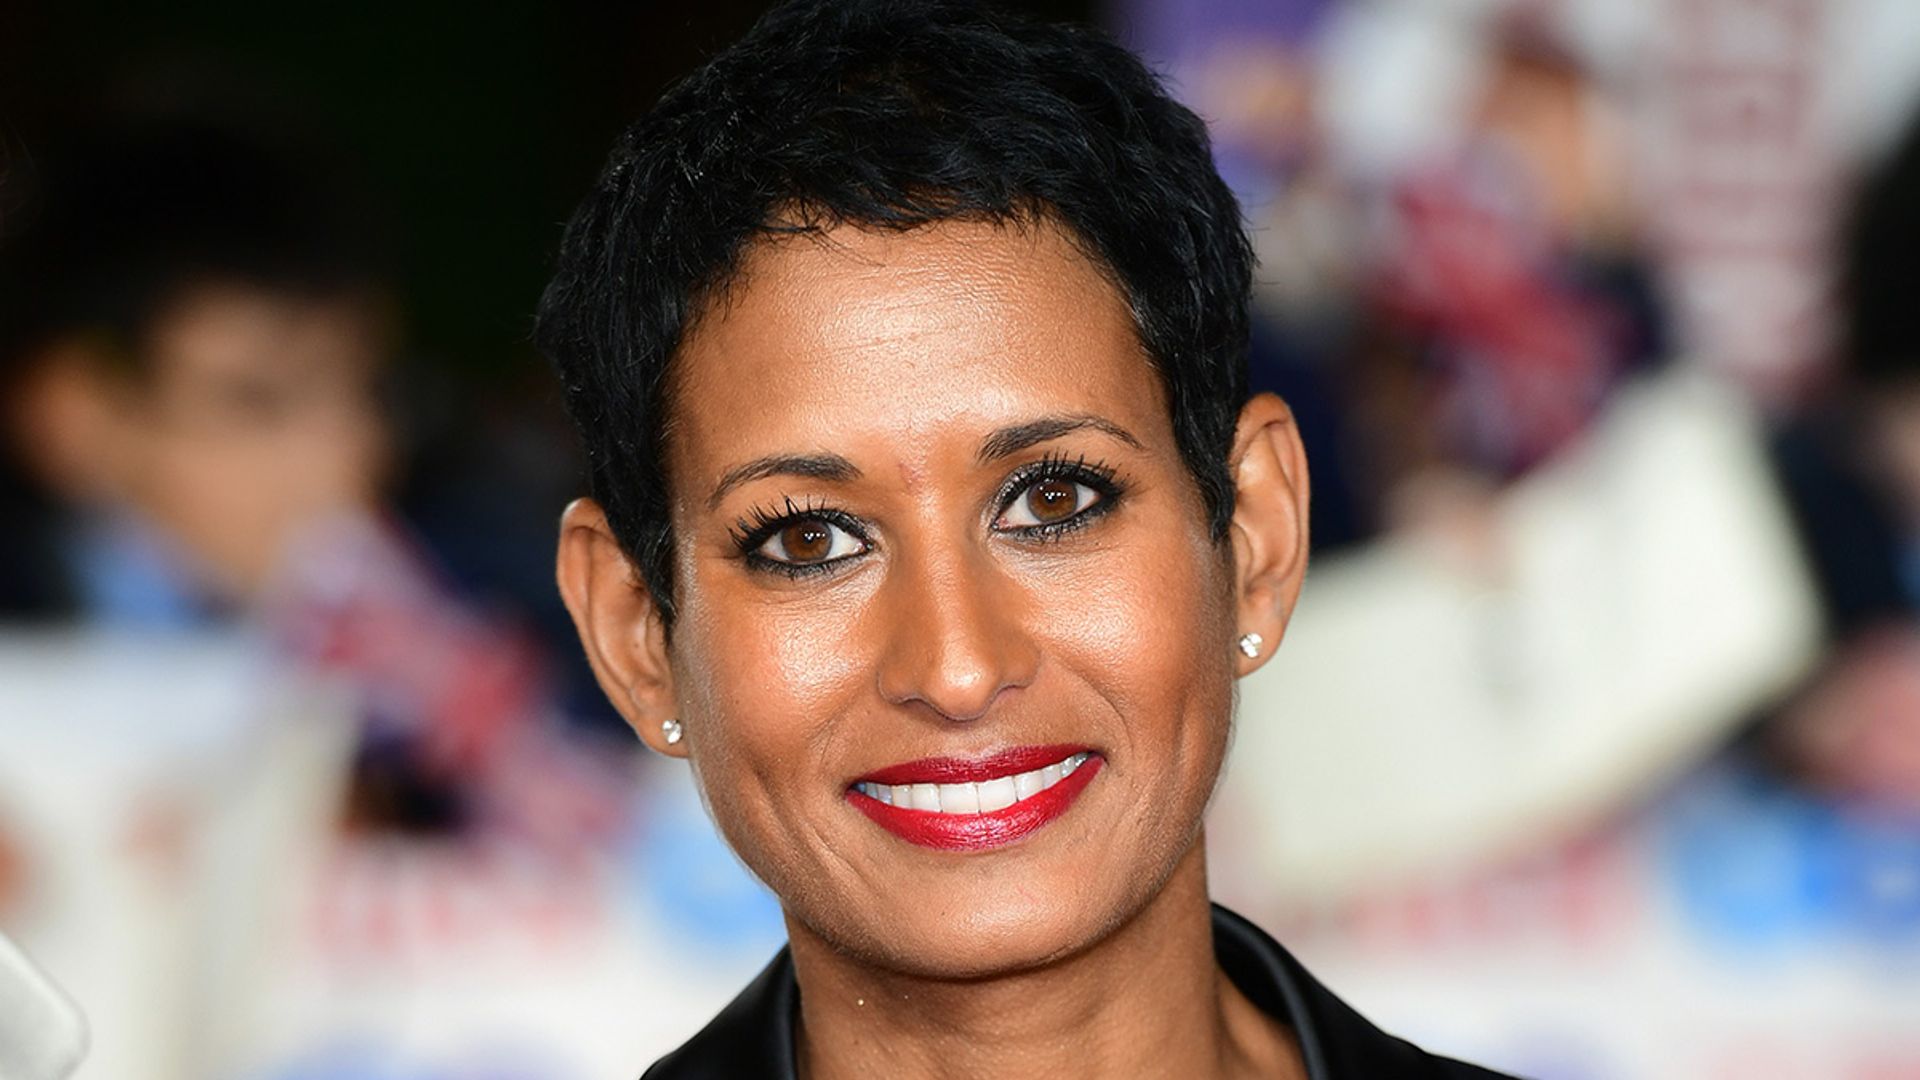 Naga Munchetty looks wildly different with long hair transformation – see photo